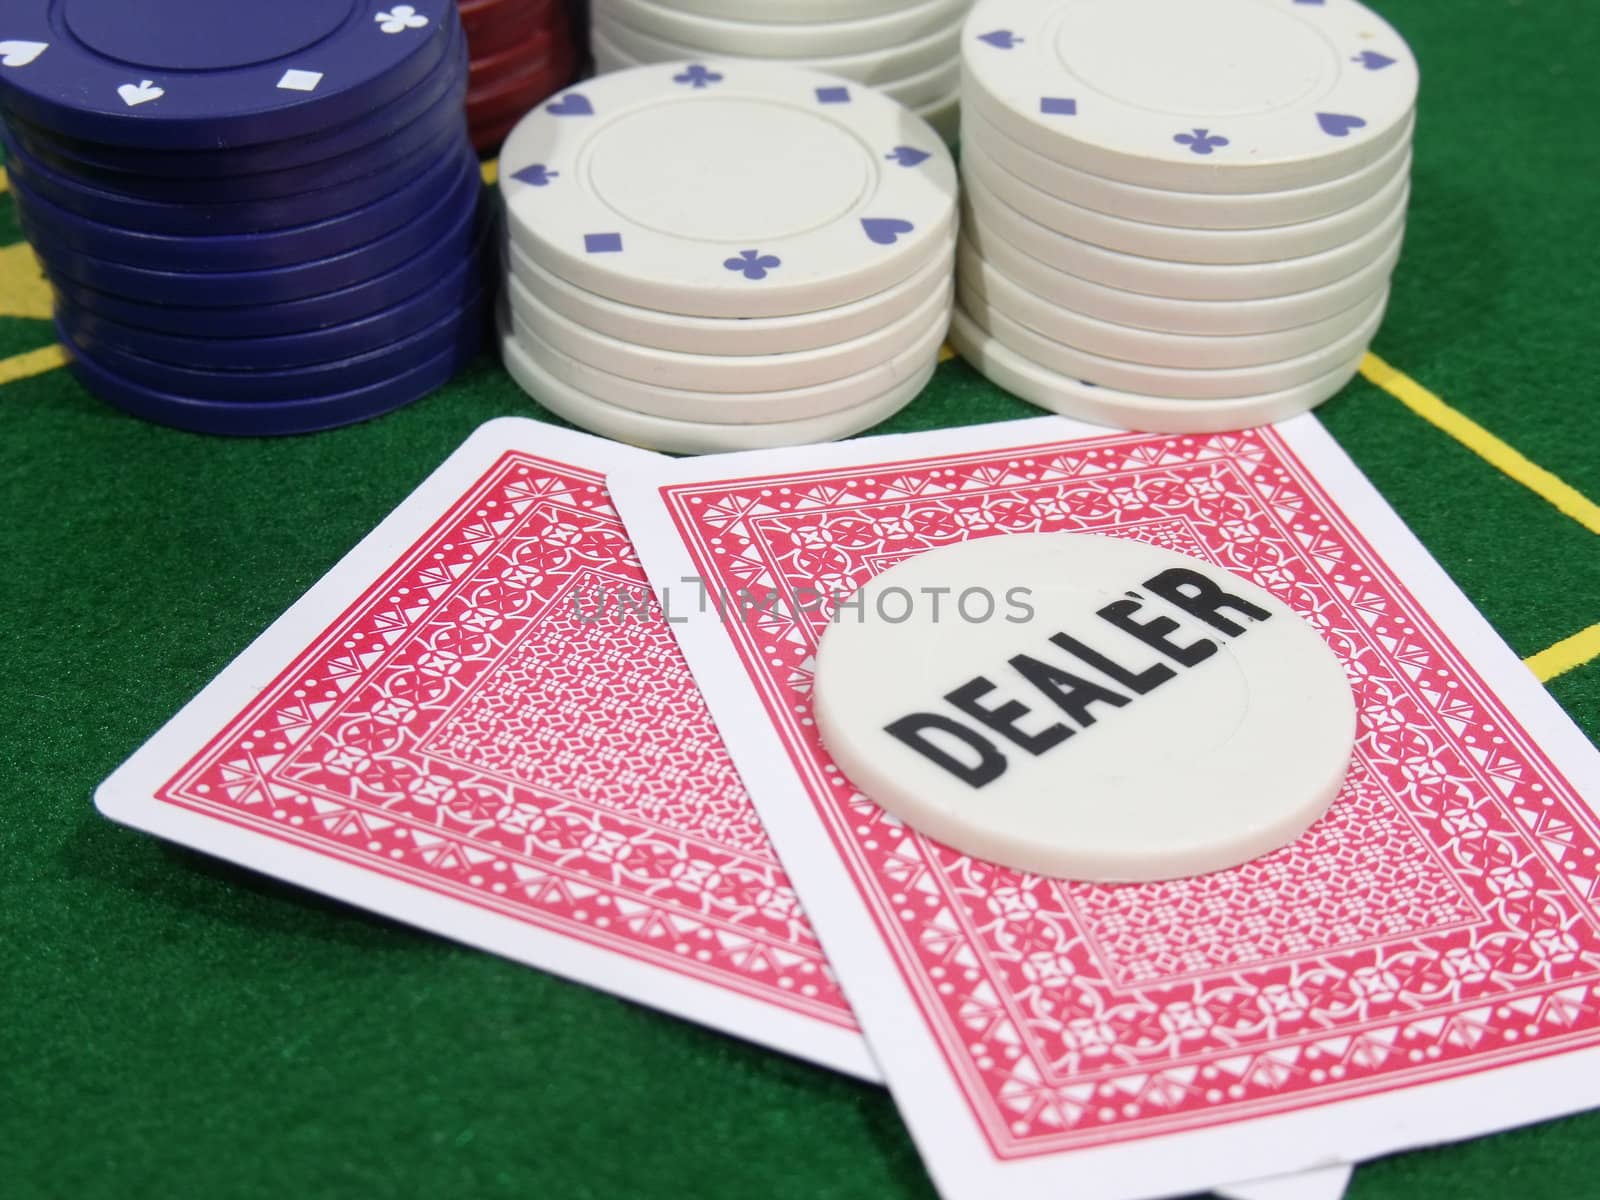 Dealer chips on poker table by WarburtonPhotos